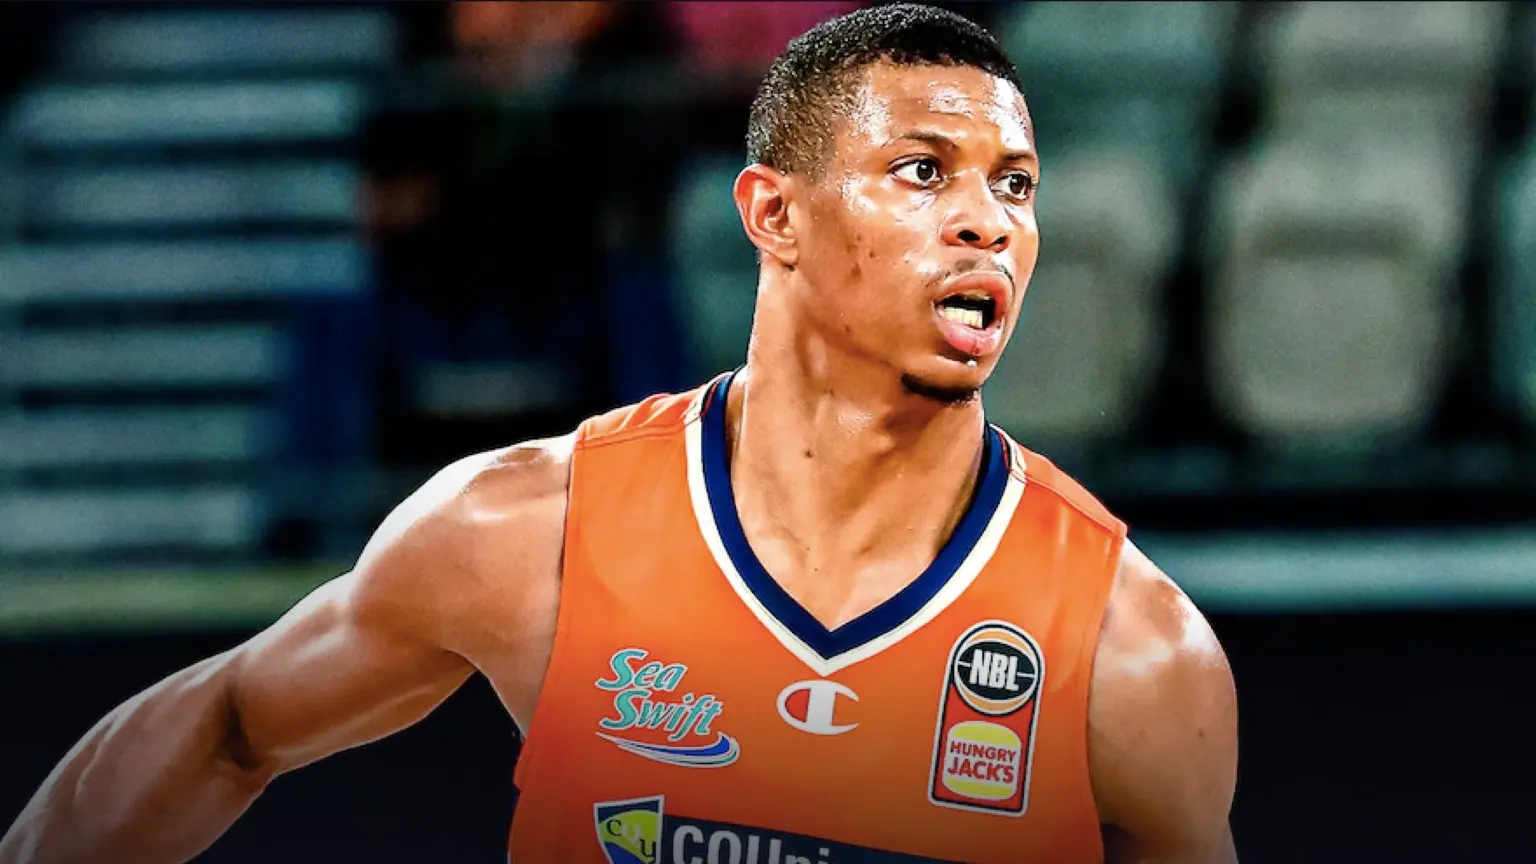 How to watch 2020/21 NBL season live and online